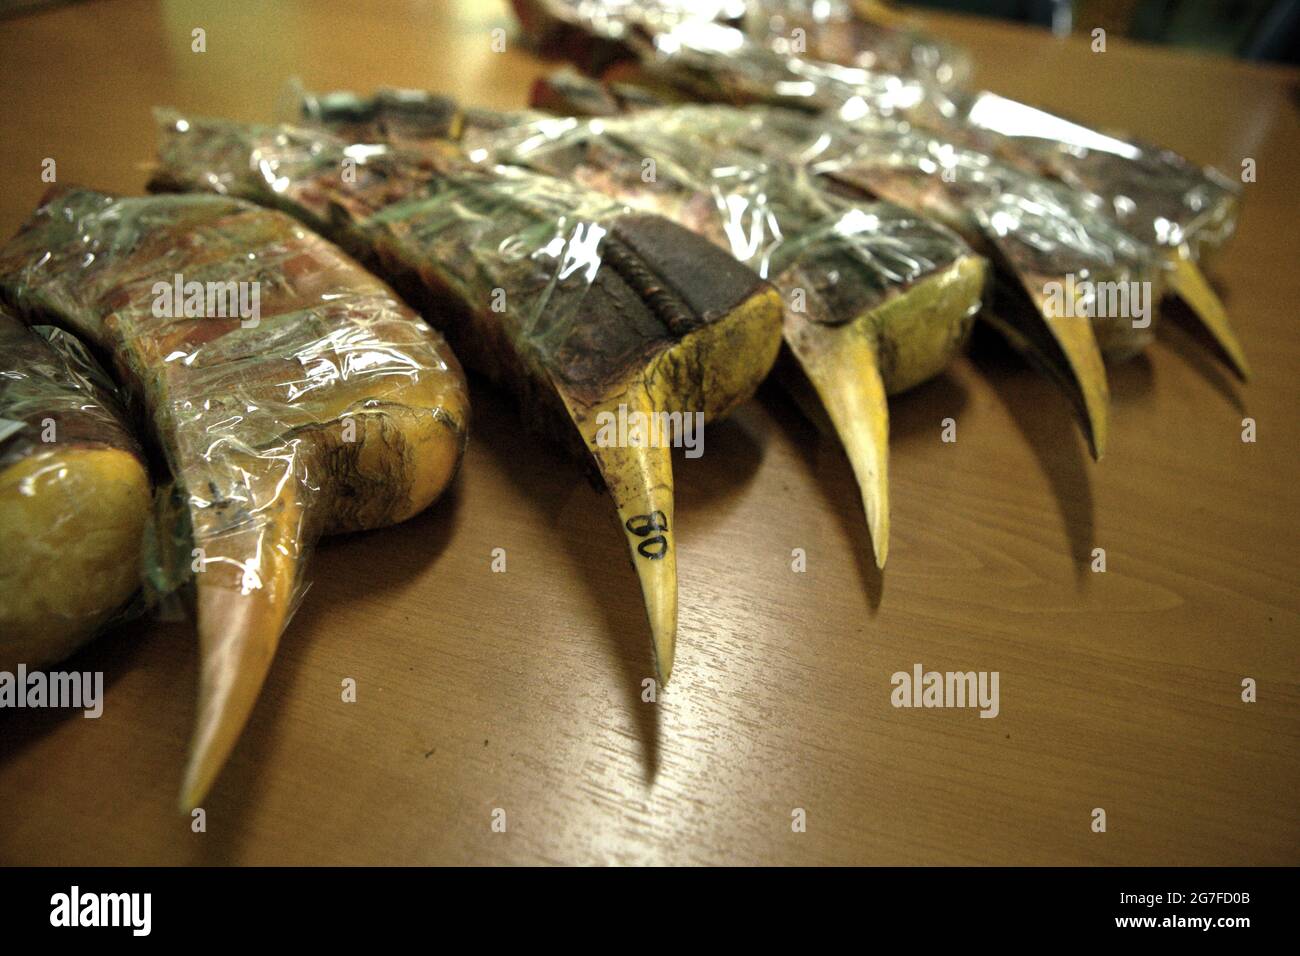 Jakarta, Indonesia. 1st July 2013. Beaks of hornbills that were seized from being smuggled to China from Jakarta's Soekarno-Hatta International Airport. Photographed at the office of Indonesia's Nature Conservation Agency (BKSDA) in Jakarta. Stock Photo